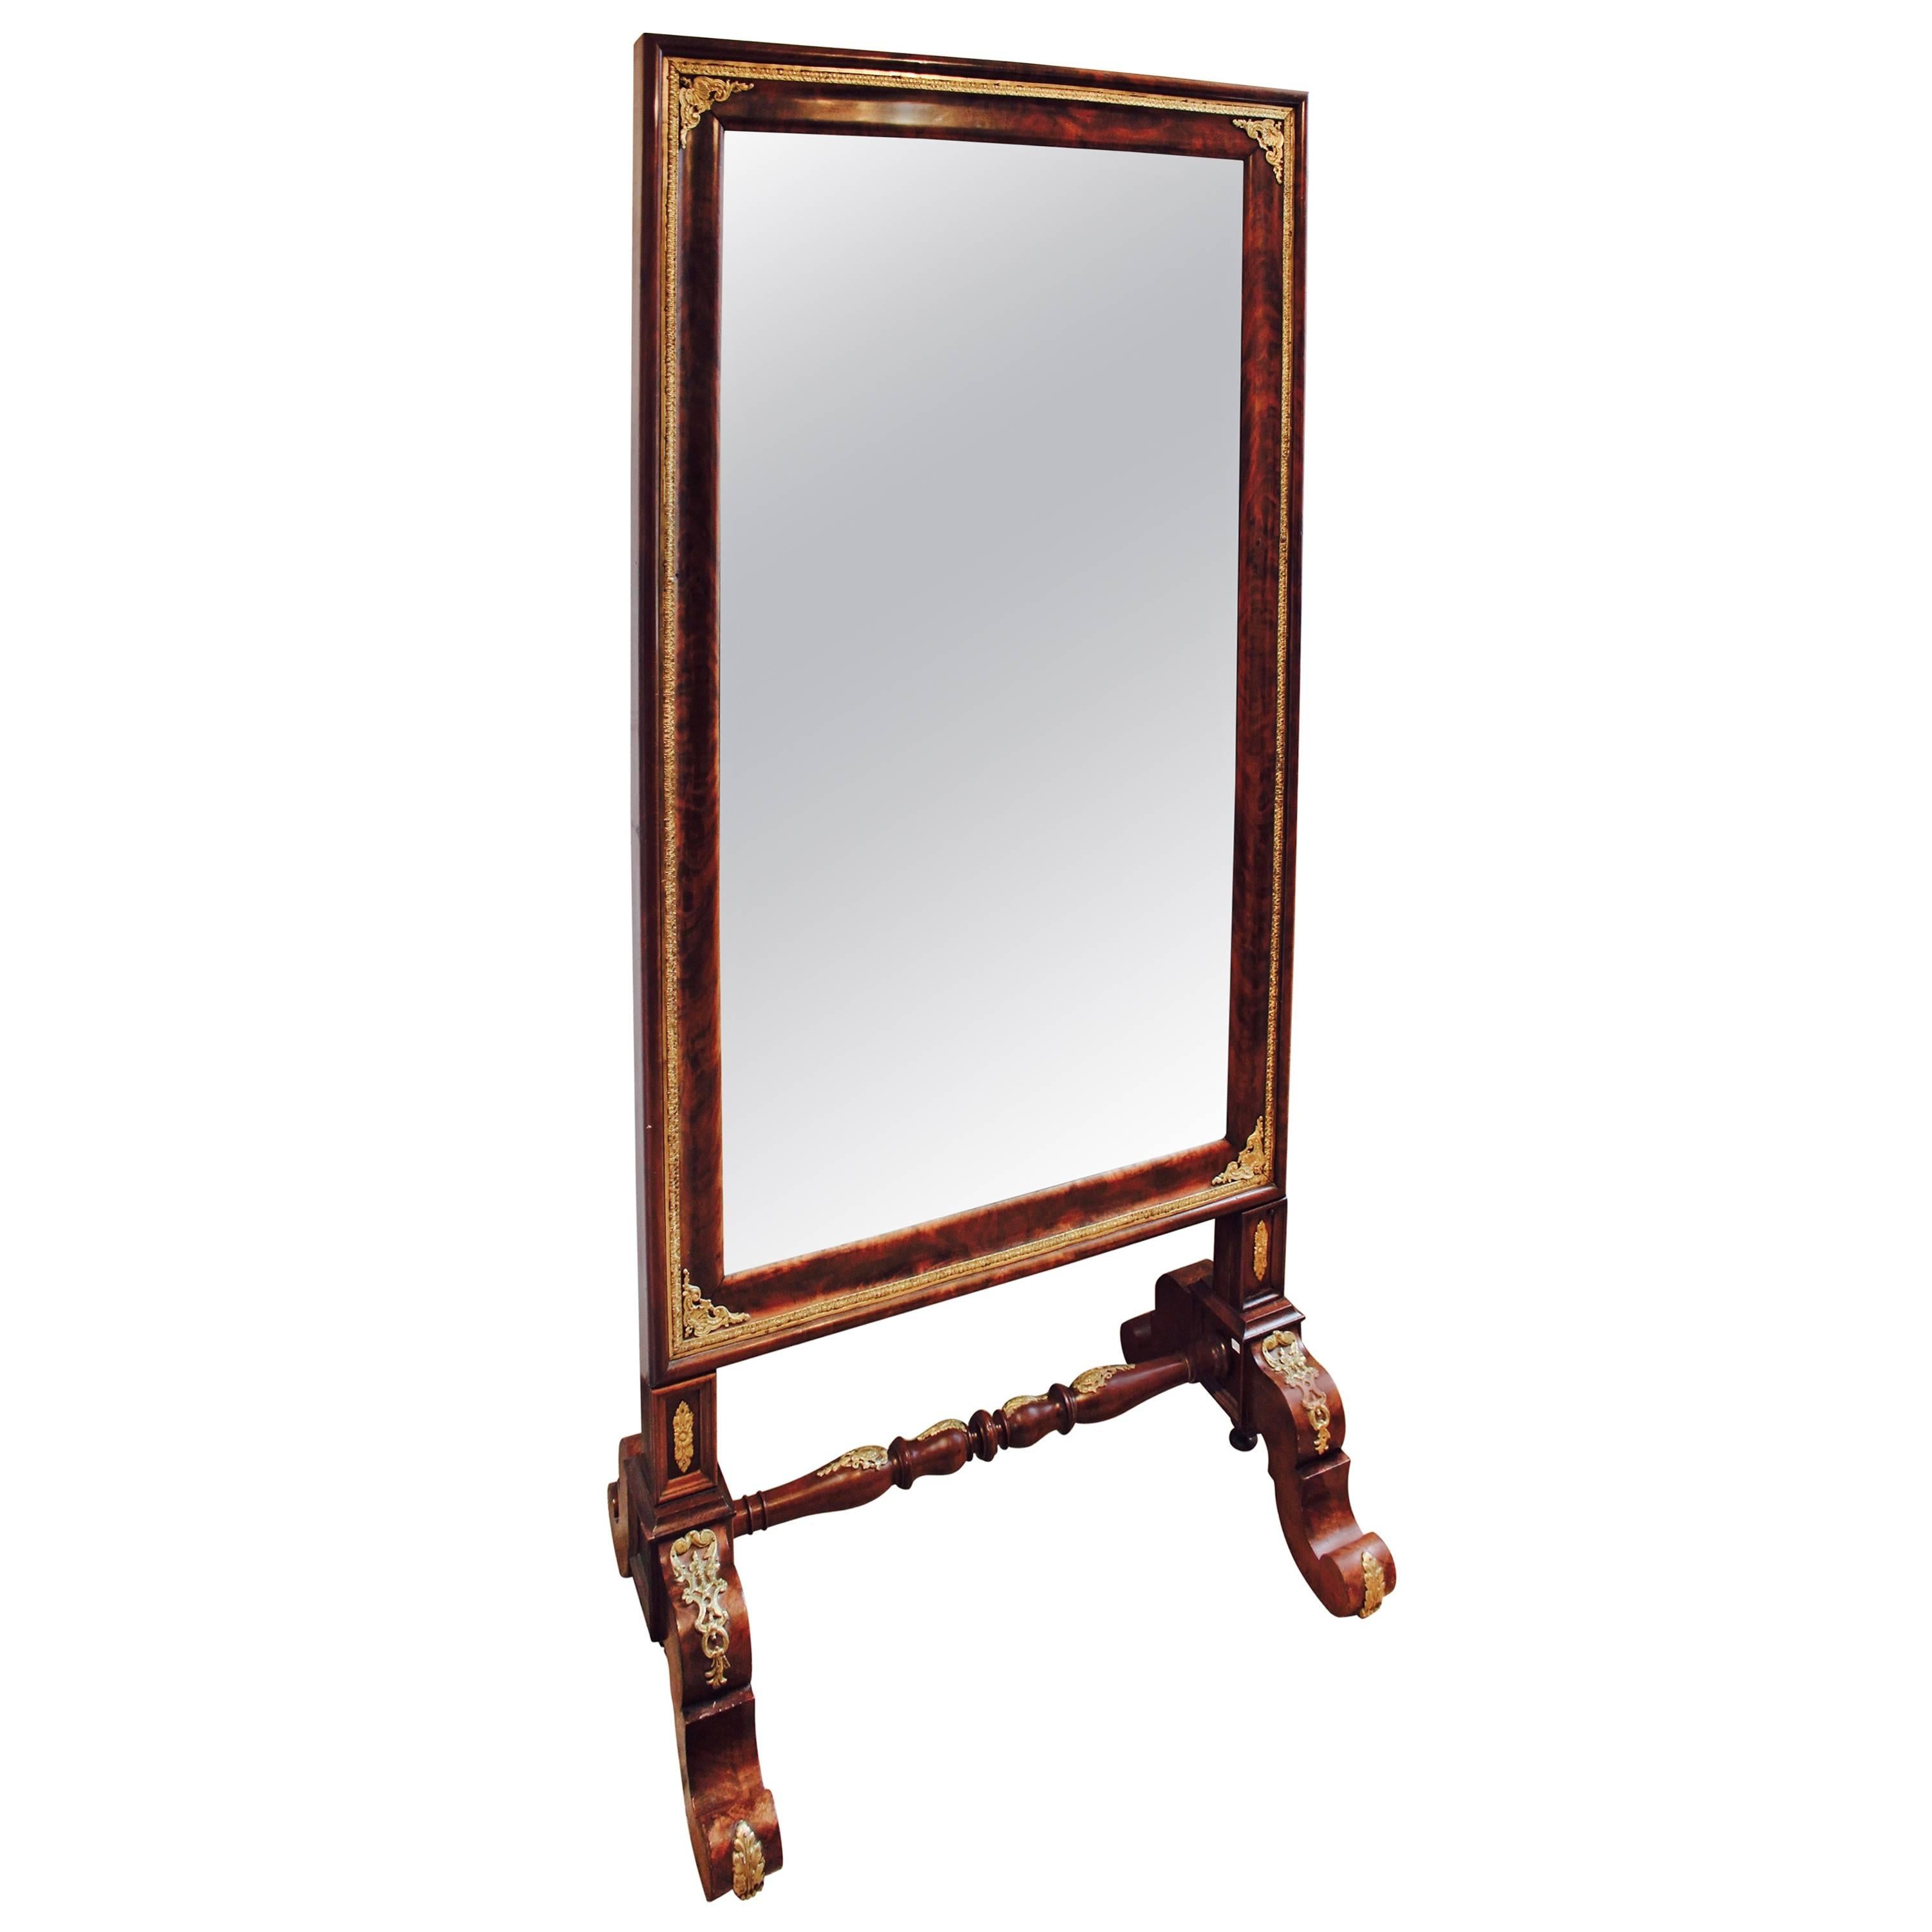 French Empire Style Cheval Mirror, 19th Century